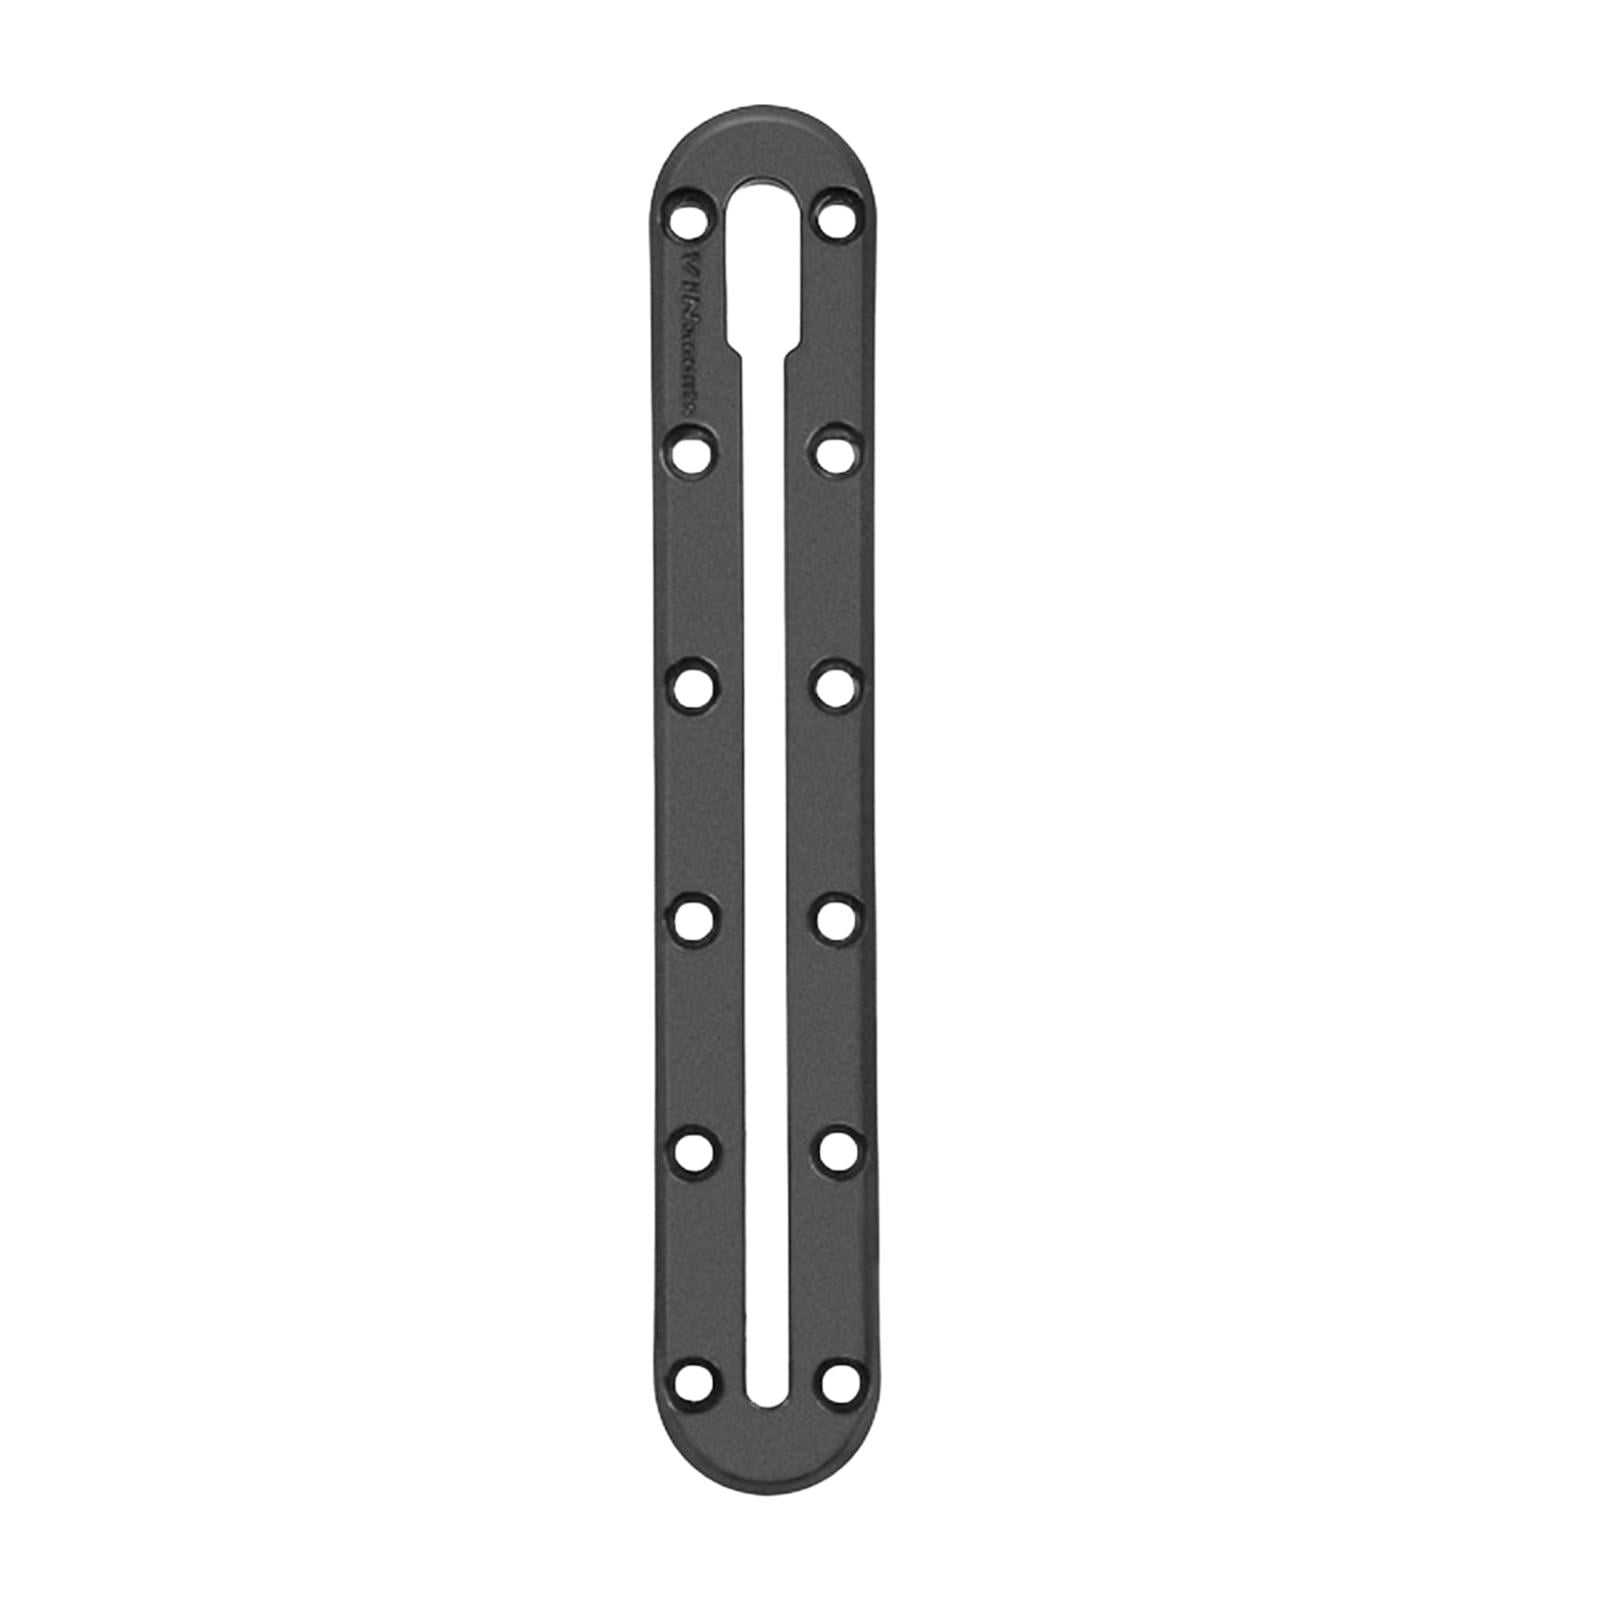 Kayak Track Mount Base, Easy Install Fine Production Accessories Boat Round  Rail Mount Plum Shape Portable For Rubber Dinghy 